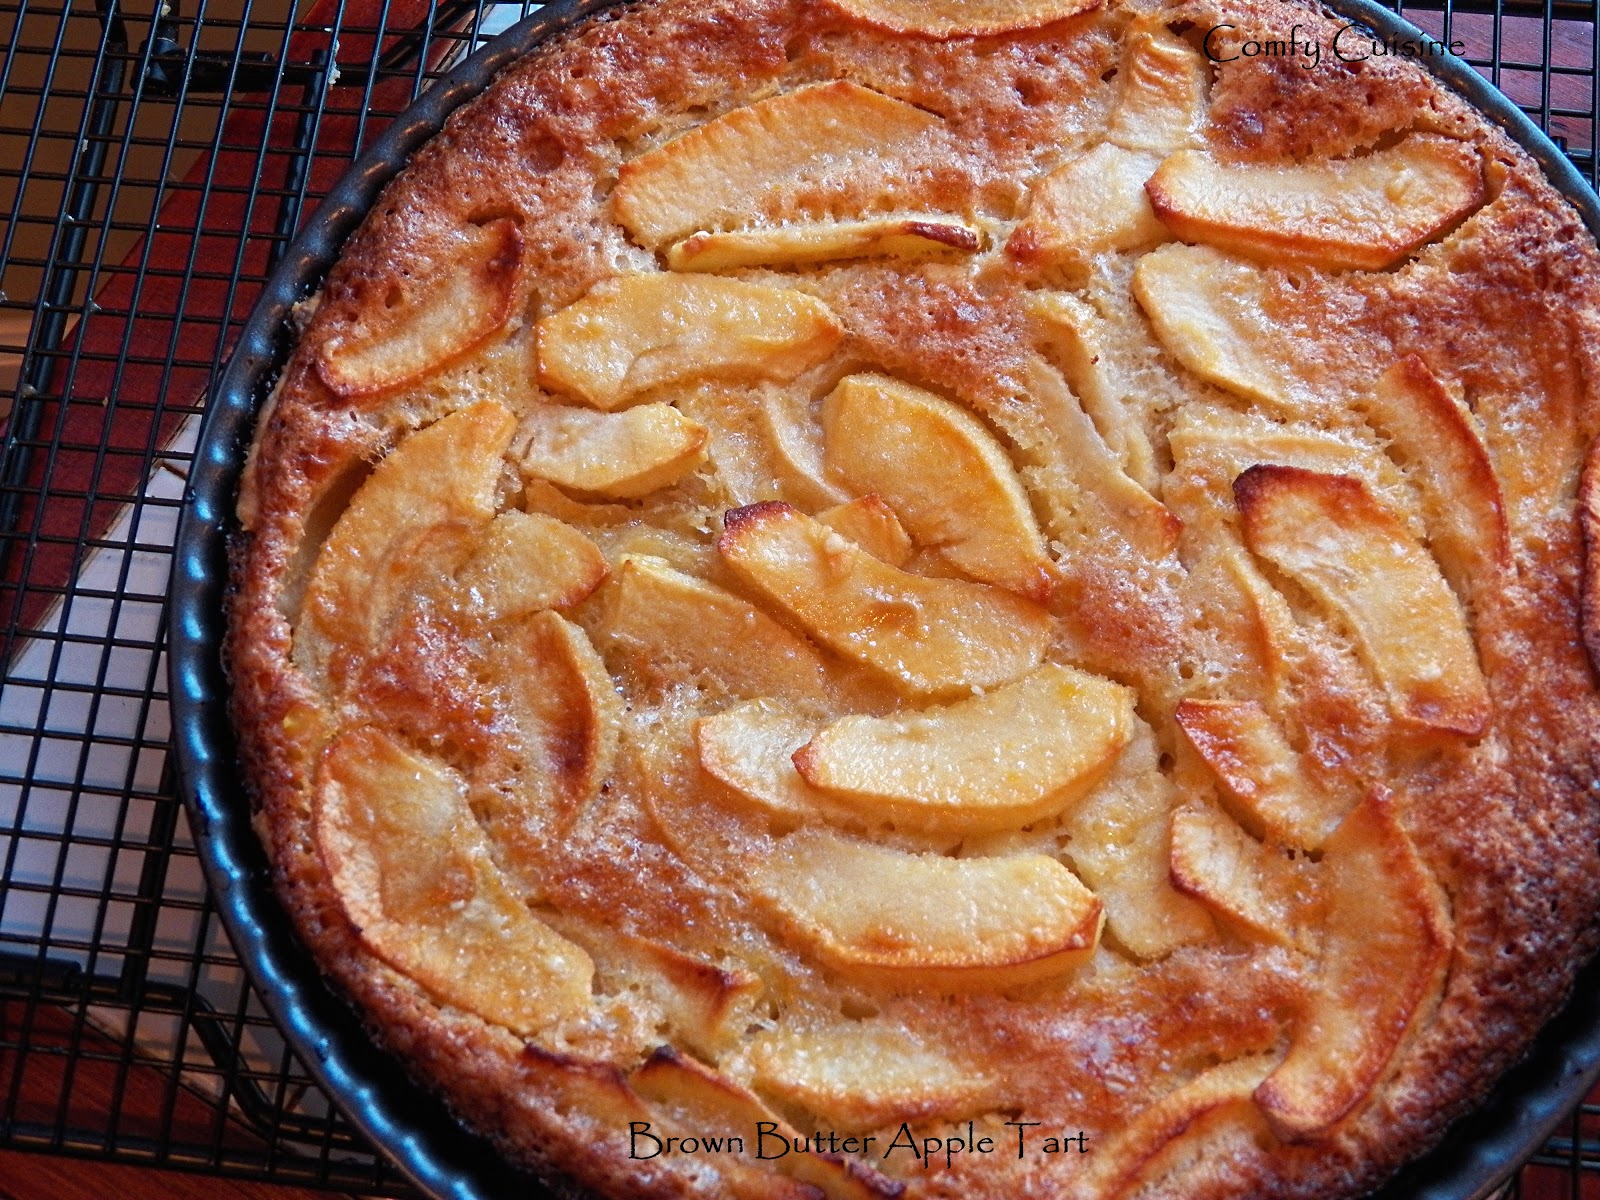 Comfy Cuisine- Home Recipes from Family & Friends: Brown Butter Apple Tart